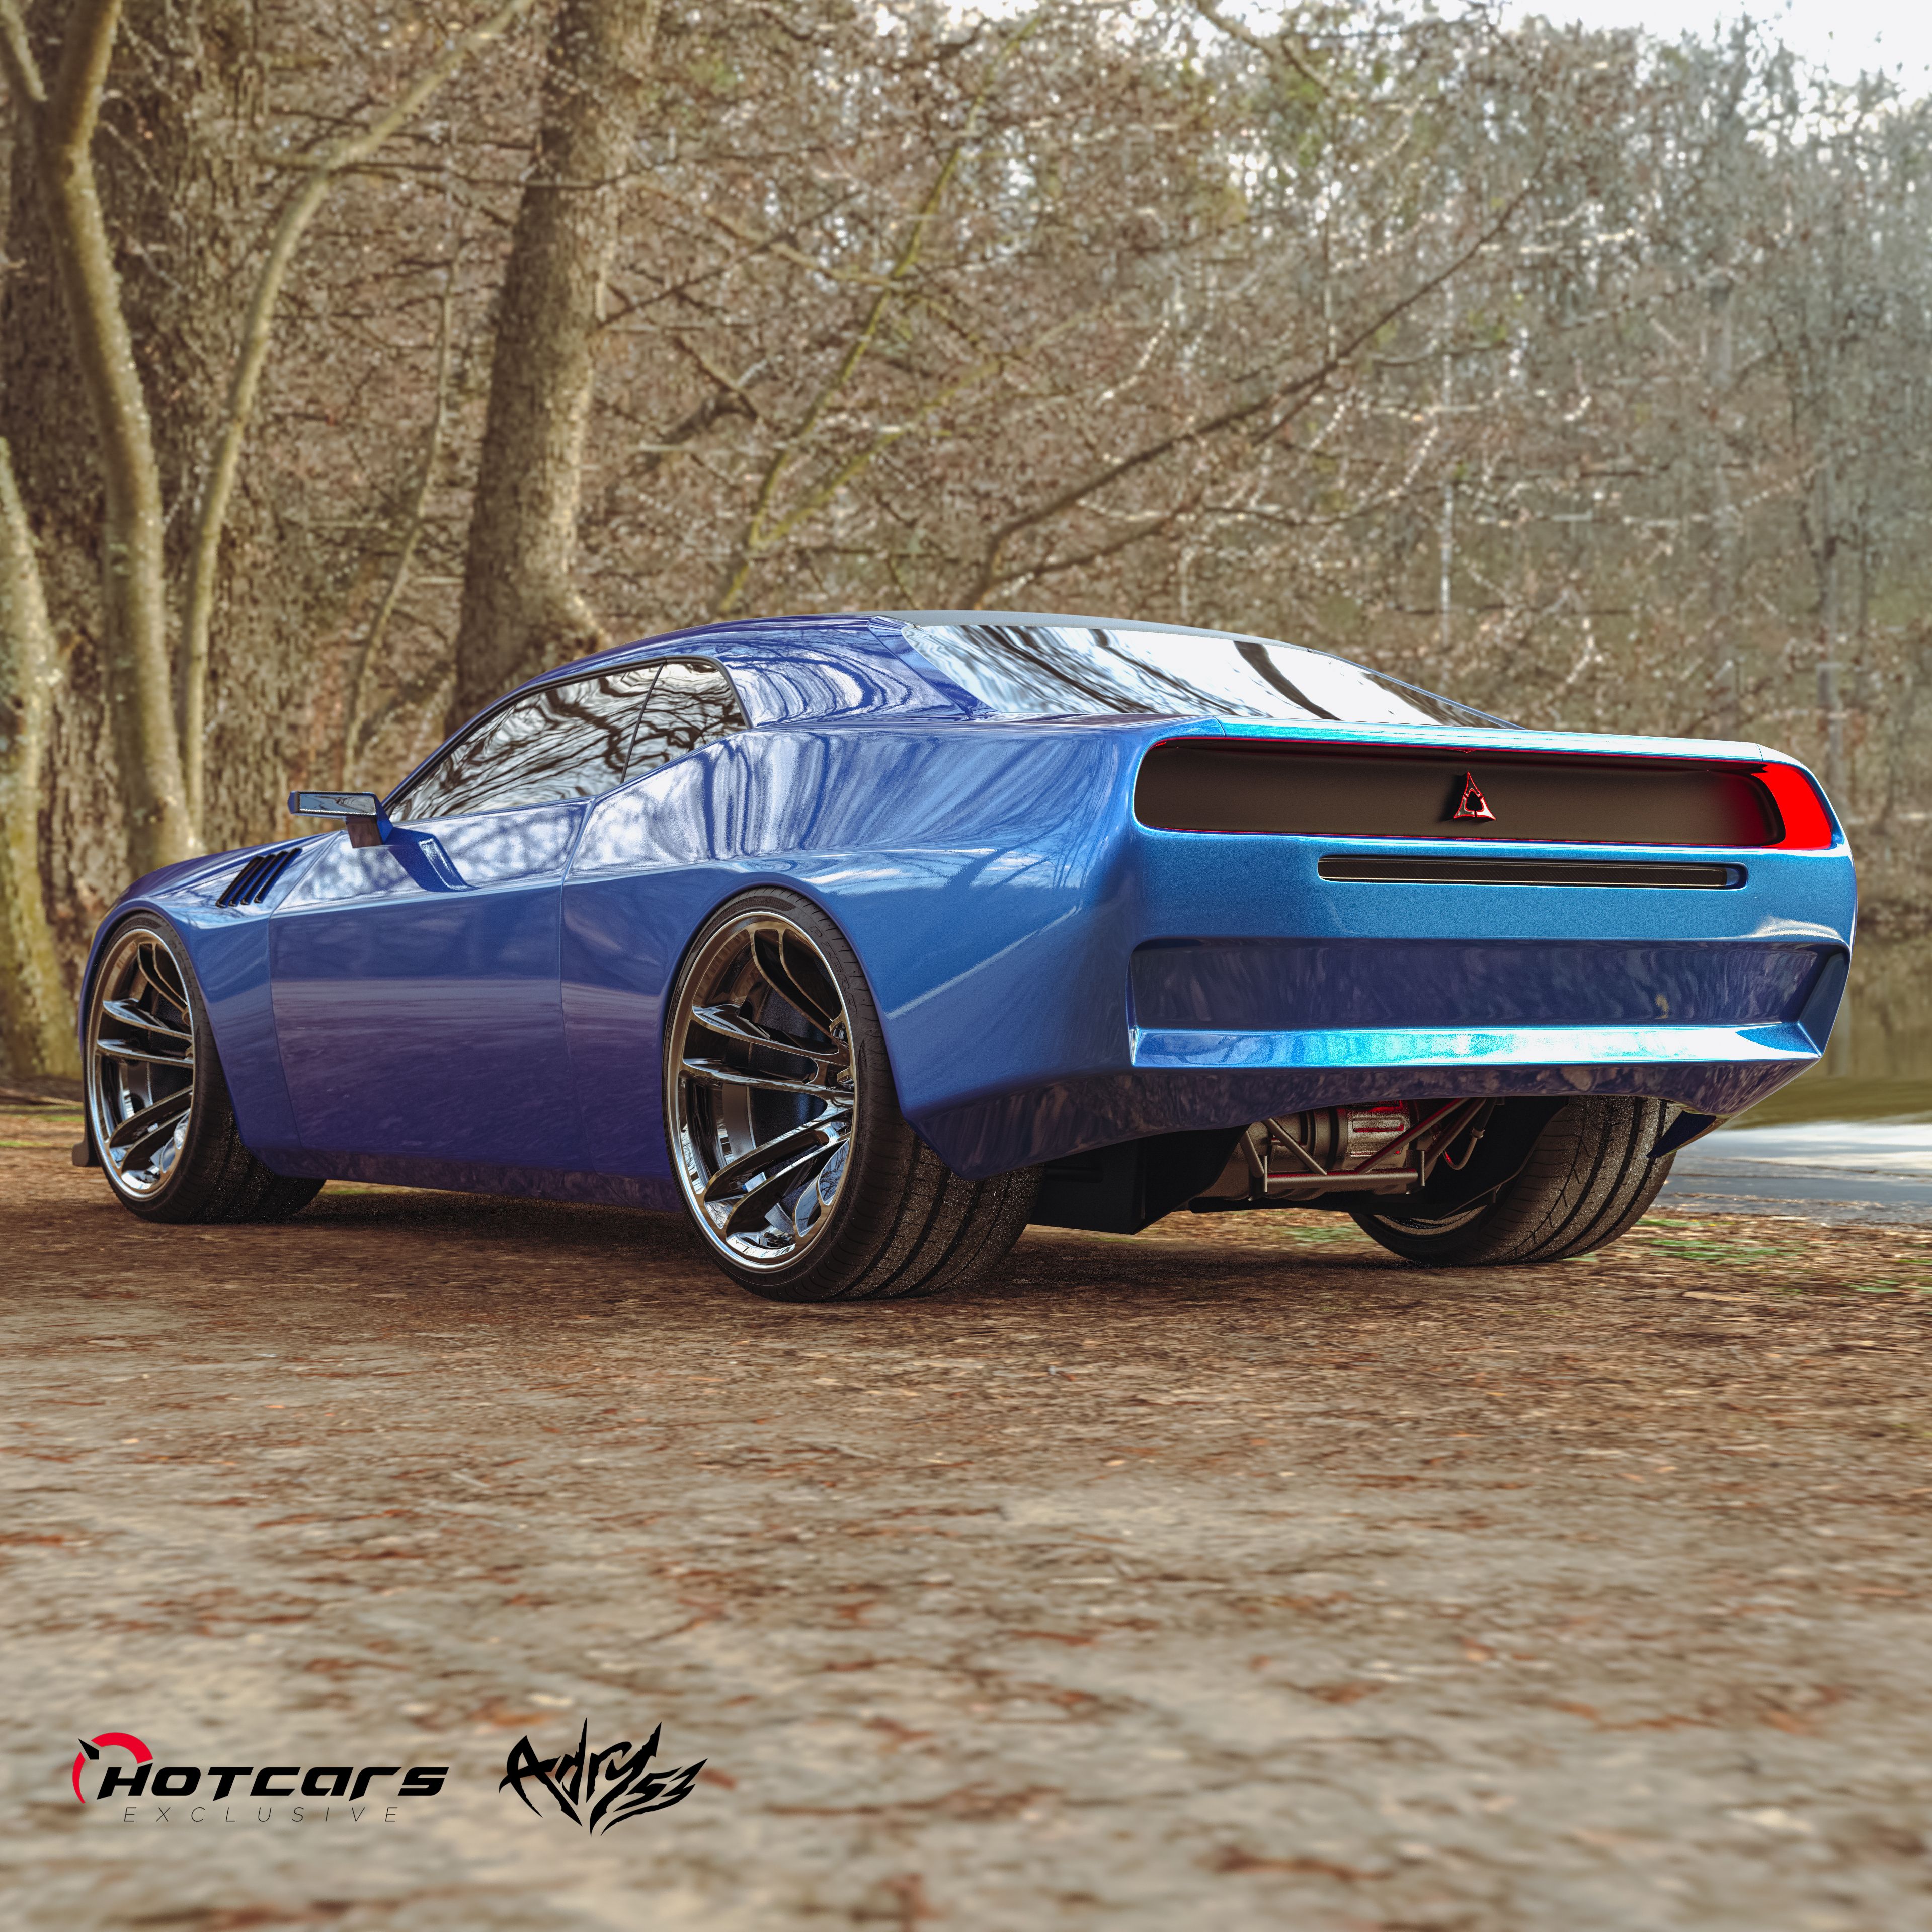 The rear of the eMuscle render finished in blue, in a coast environment